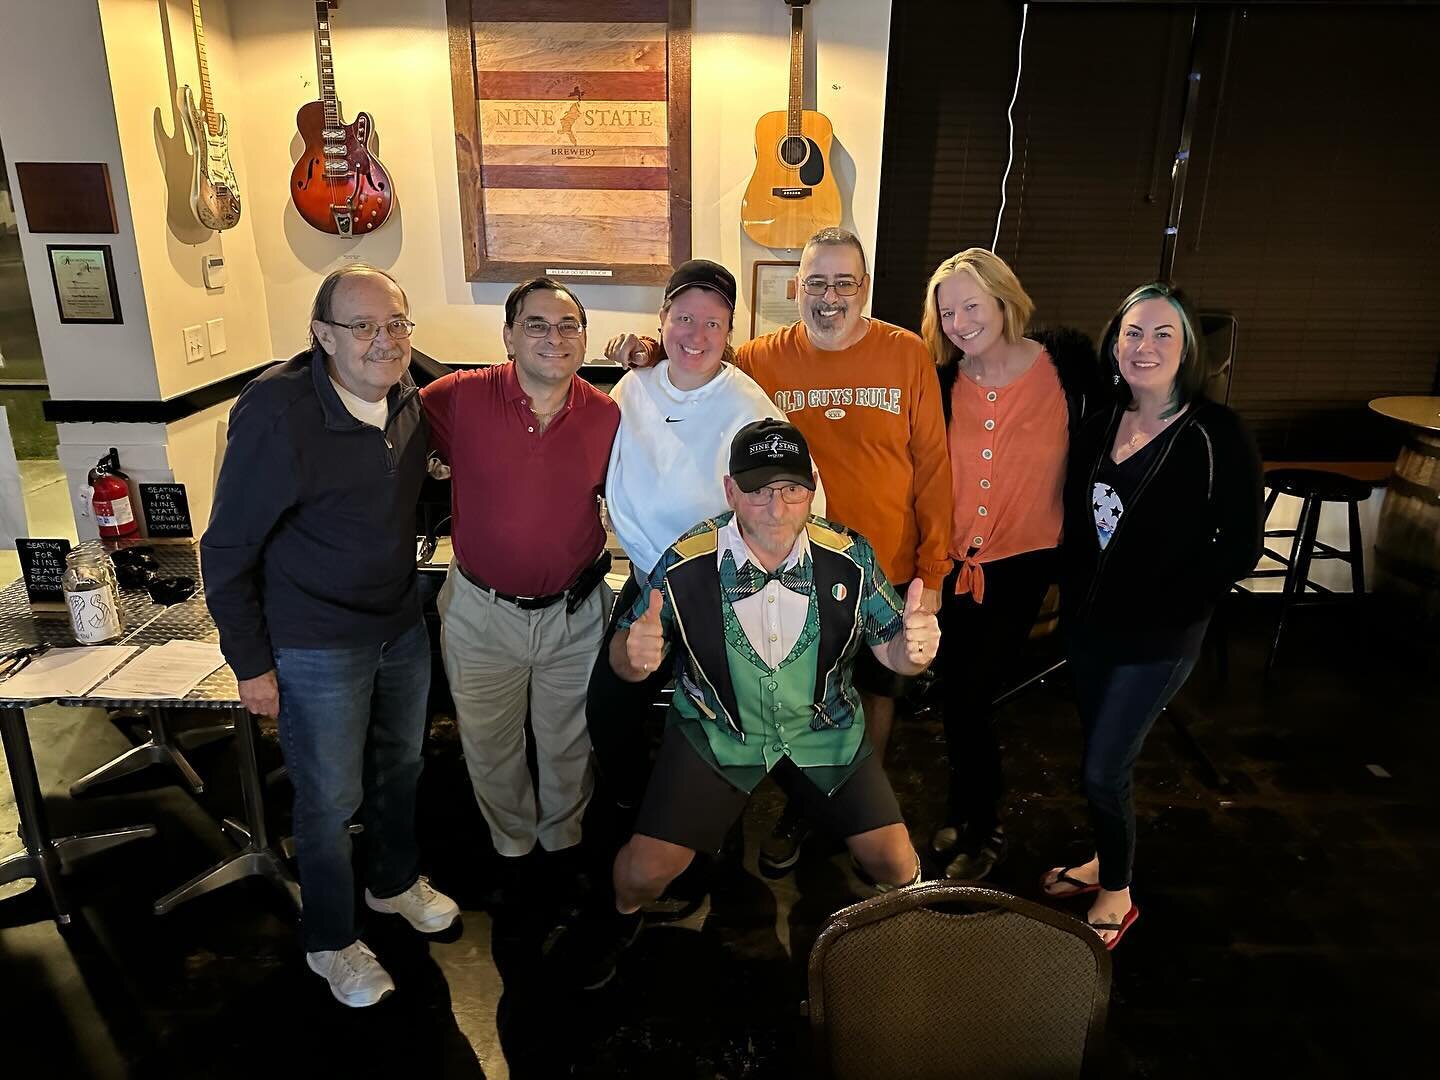 Congratulations to last month&rsquo;s trivia winners!

Join in on the fun and test your knowledge at our next TRIVIA NIGHT hosted by Steve Hughes, Thursday, March 14. Doors open at 5 pm. Trivia begins at 6:30 pm.